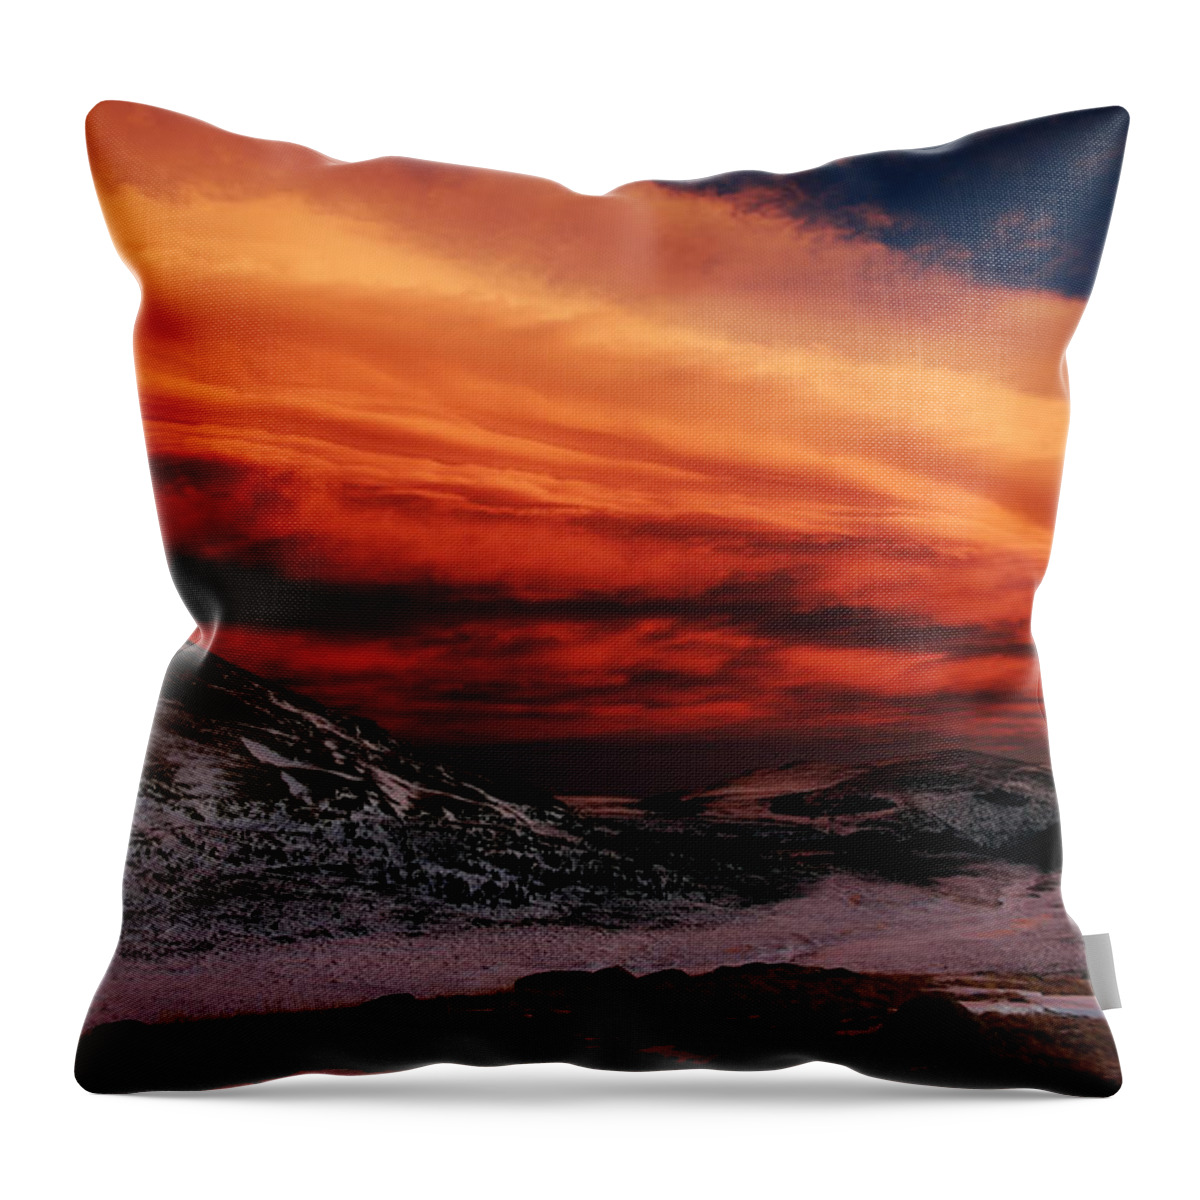 Spectacular Throw Pillow featuring the photograph God's Creation 2 by Brian Gustafson